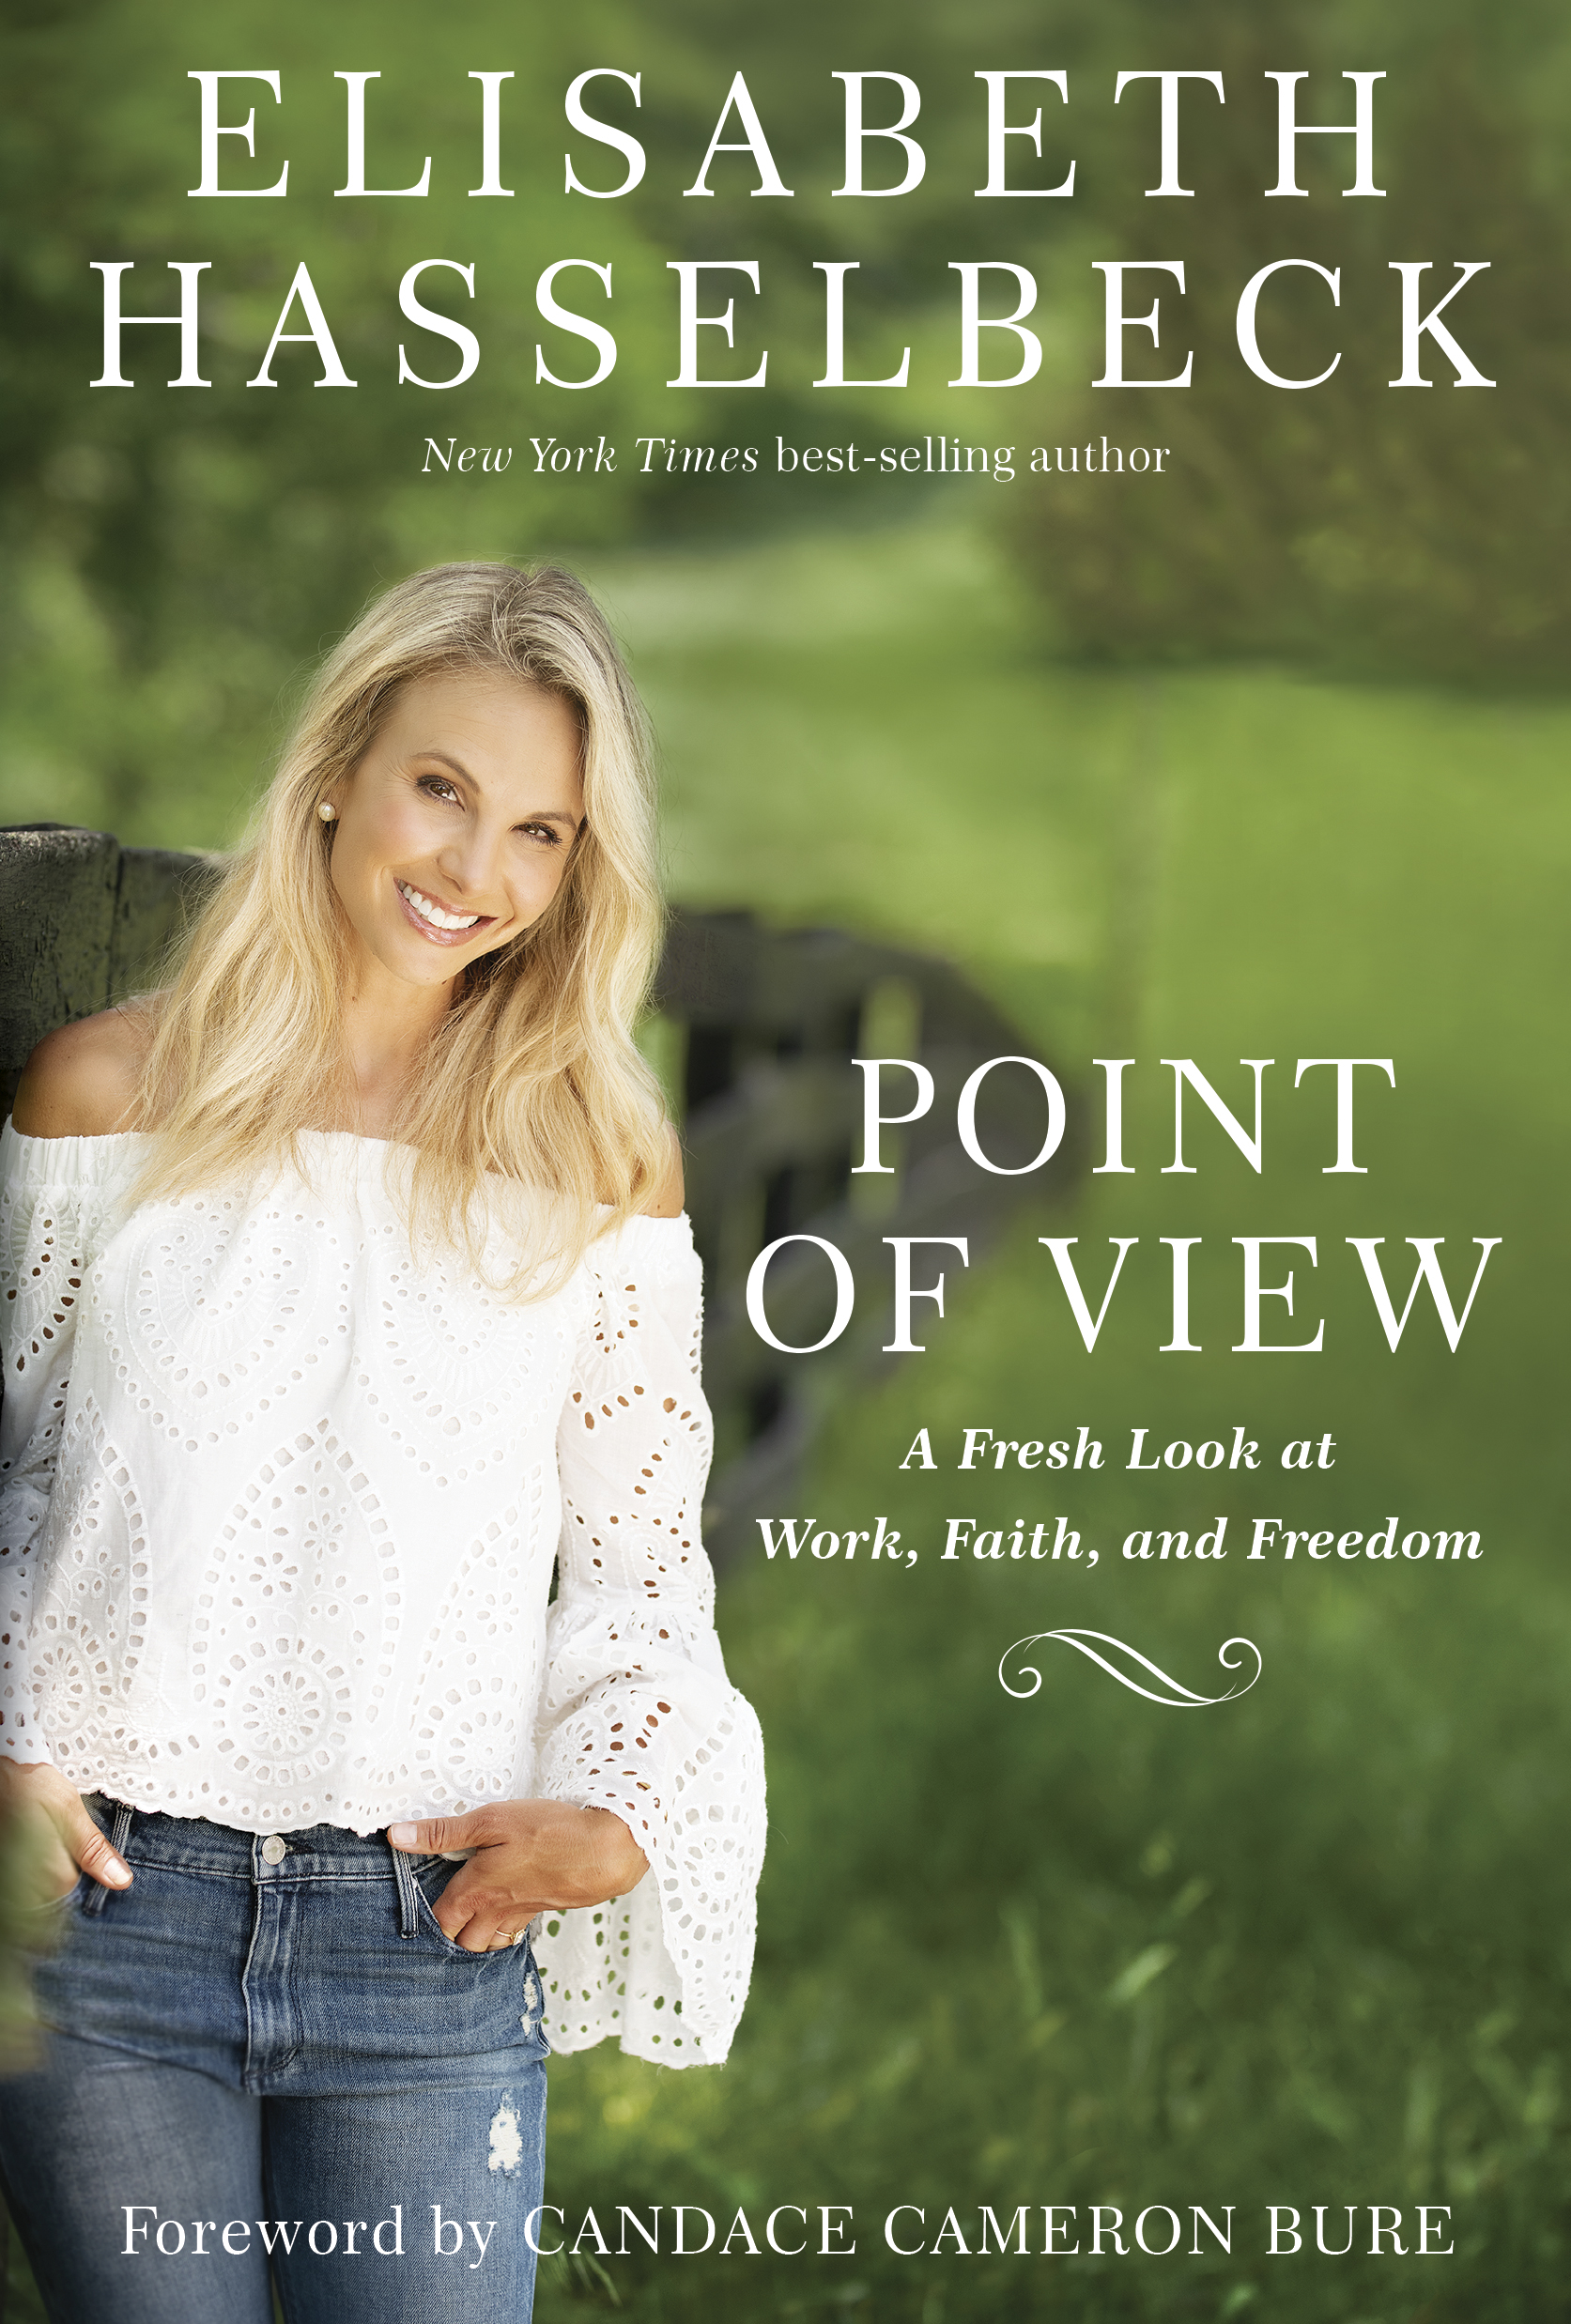 Elisabeth Hasselbeck book, Point of View